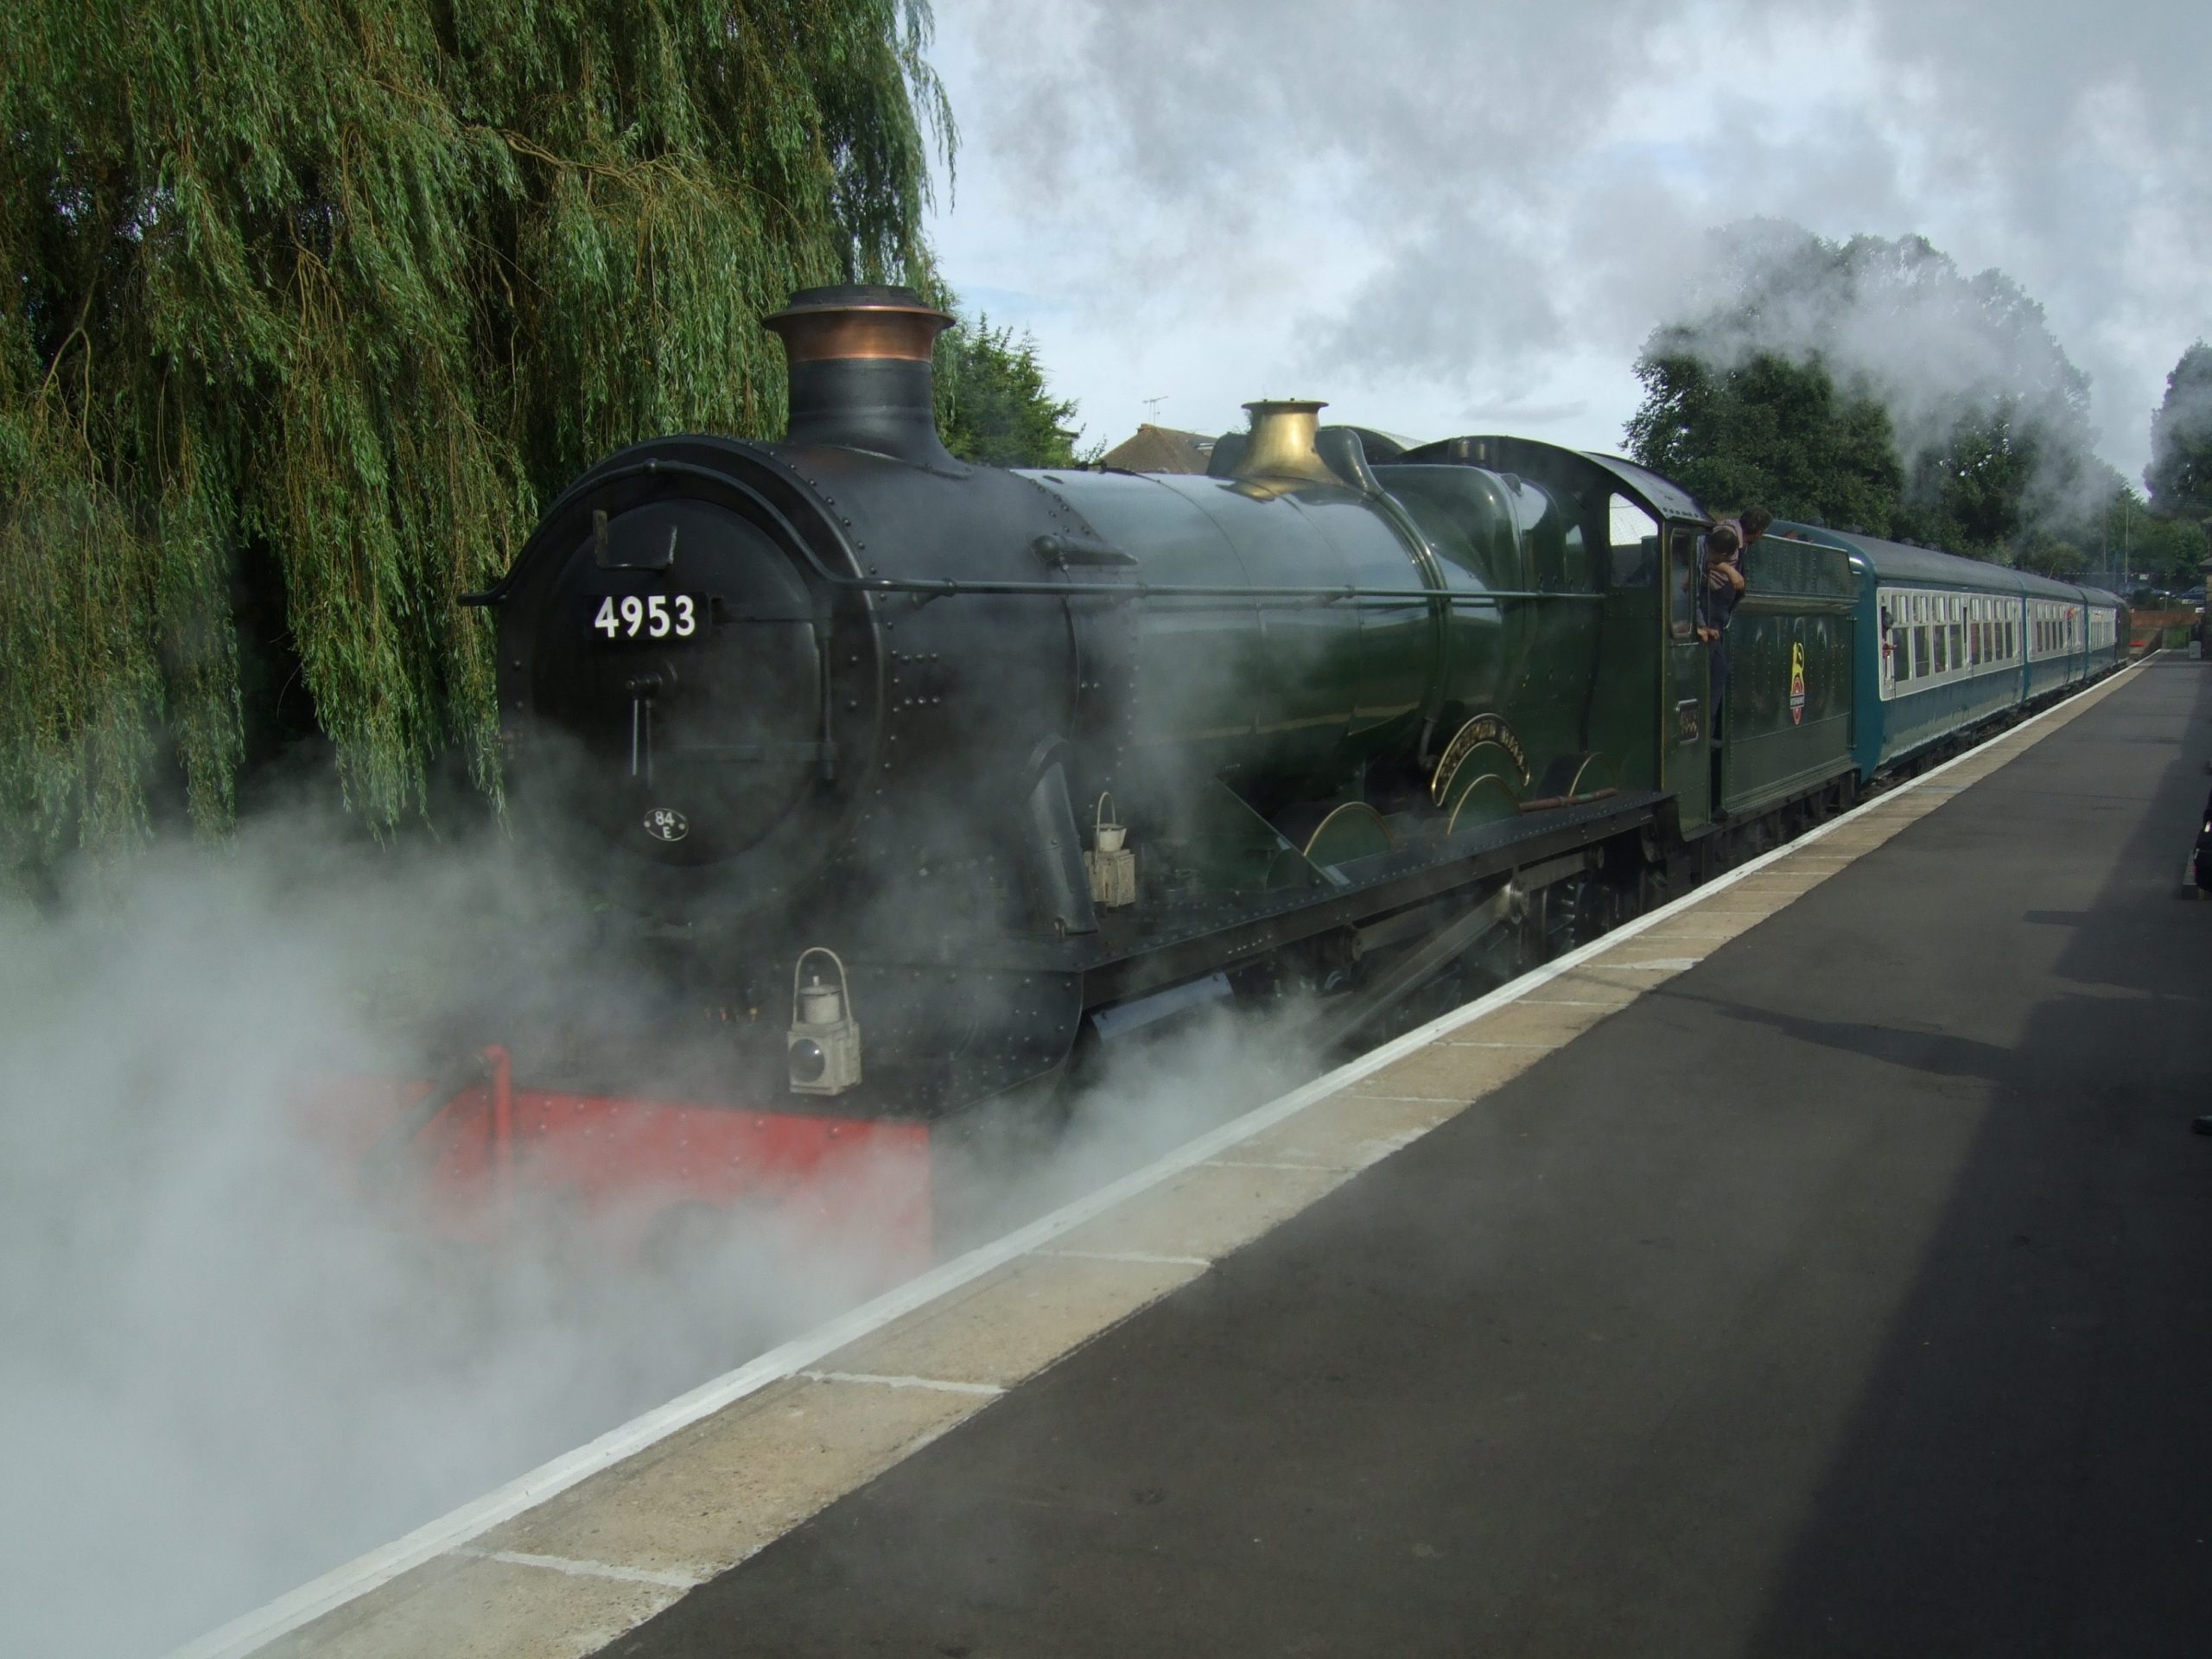 Pitchford Hall waits at Ongar with a service to North Weald